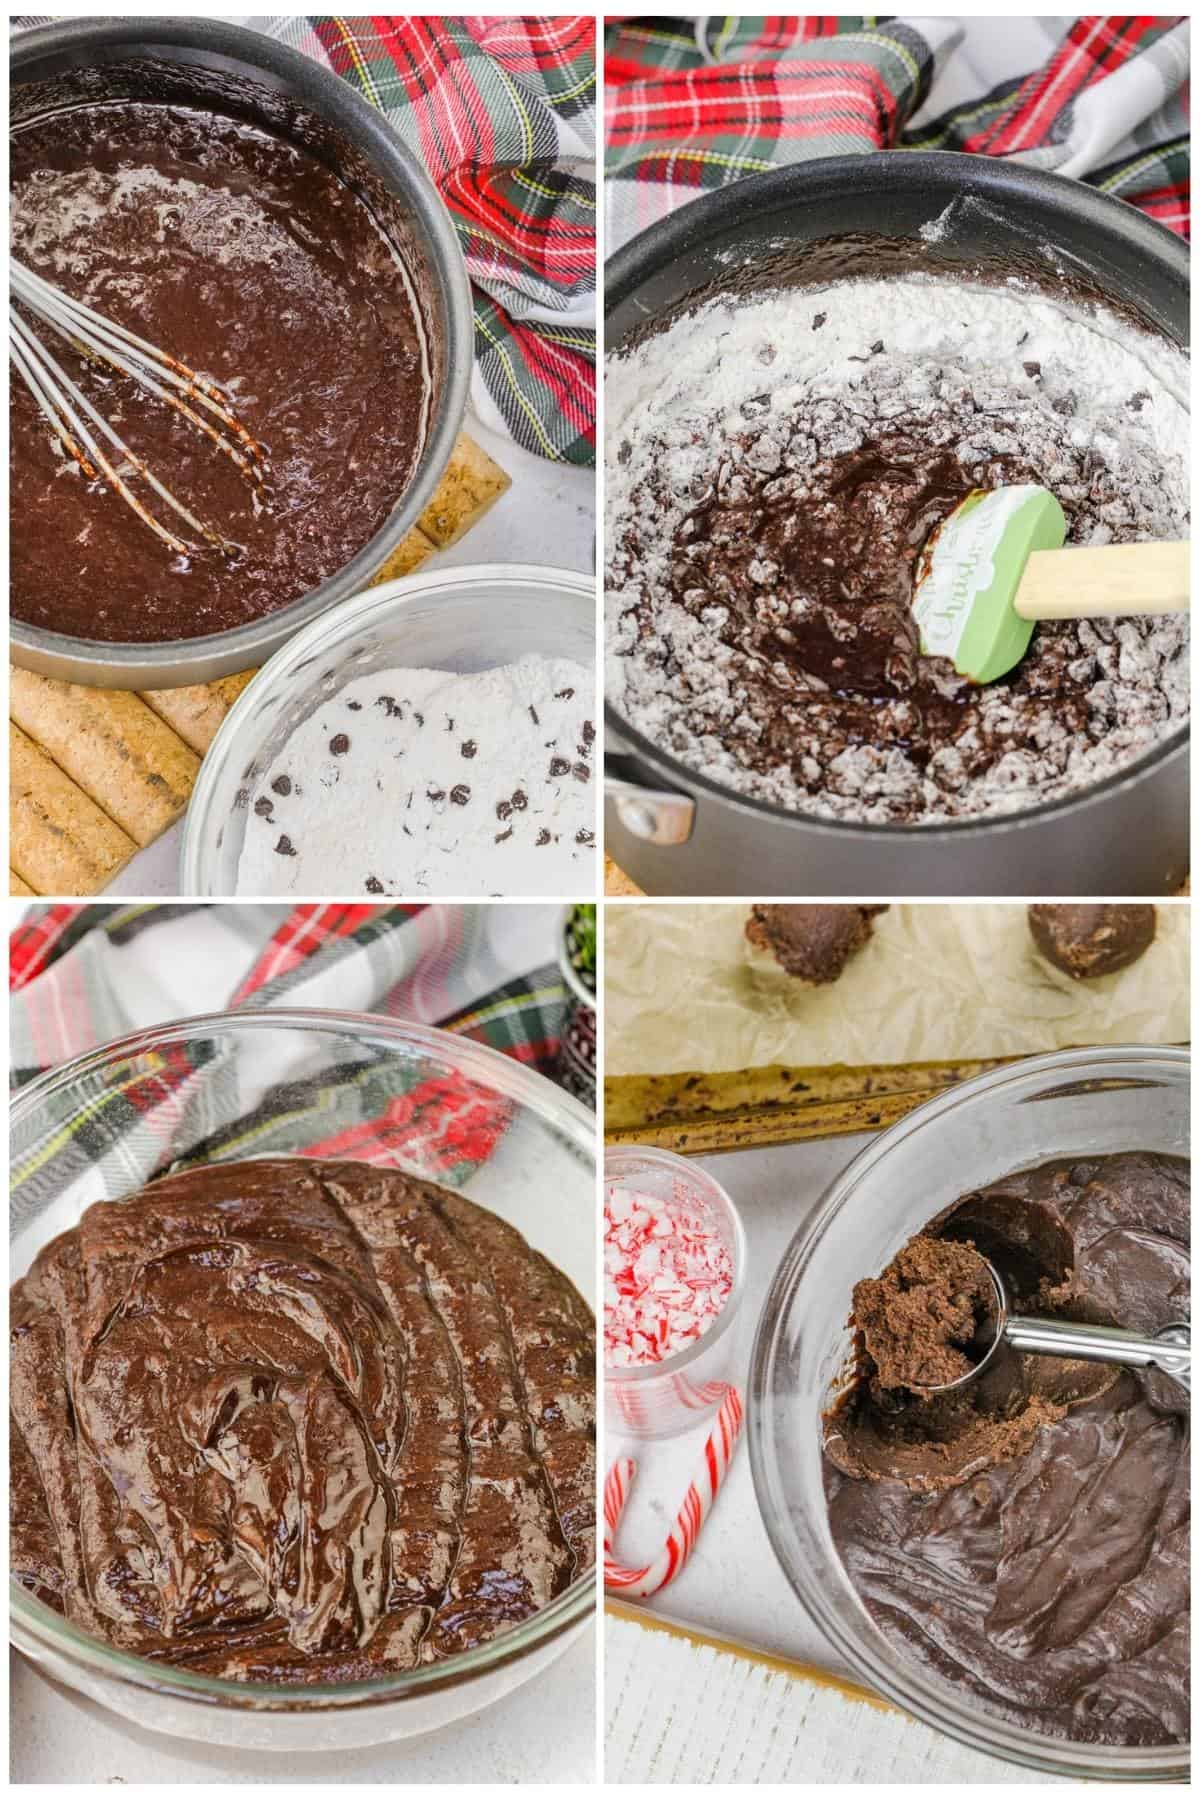 process of mixing ingredients together to make Chocolate Mint Truffle Cookies